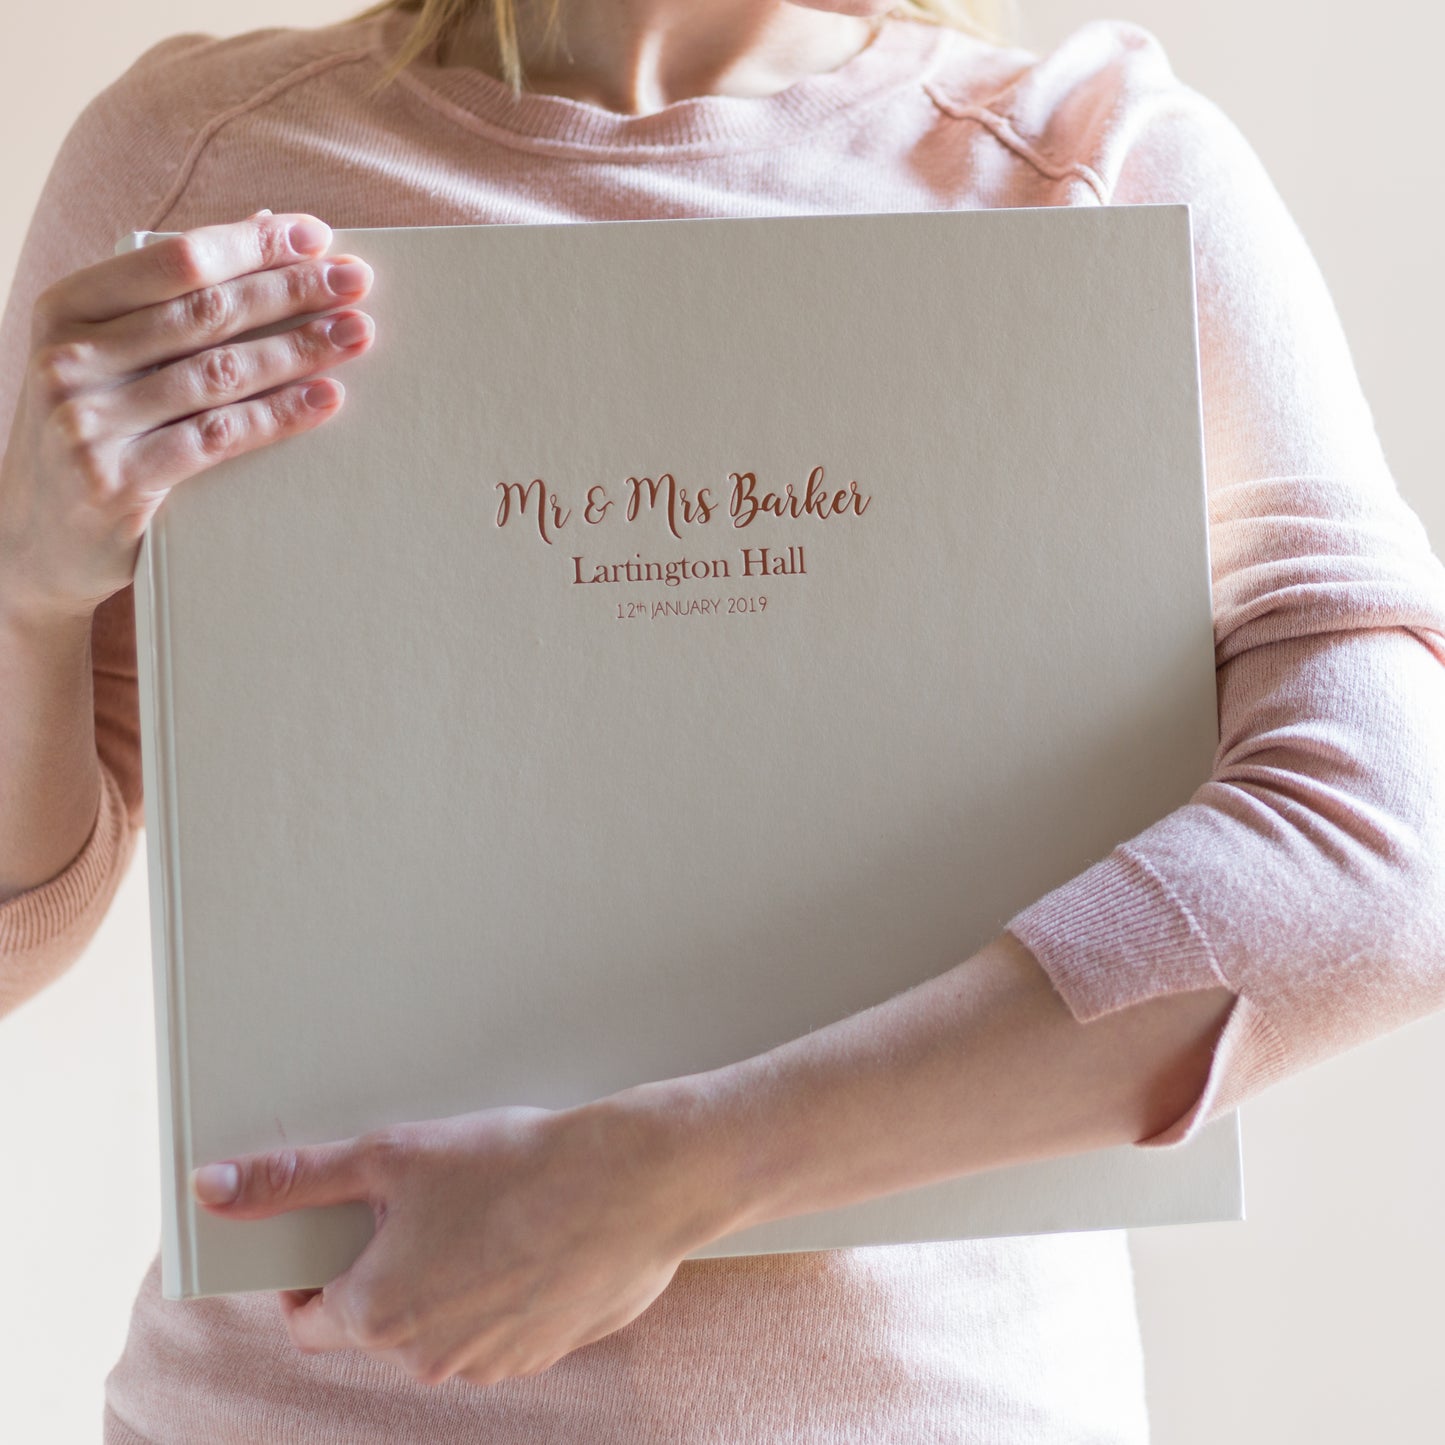 a girl in a pink jumper is clutching a large ivory wedding photo album. The photo album has wedding details hotfoil printed onto the front